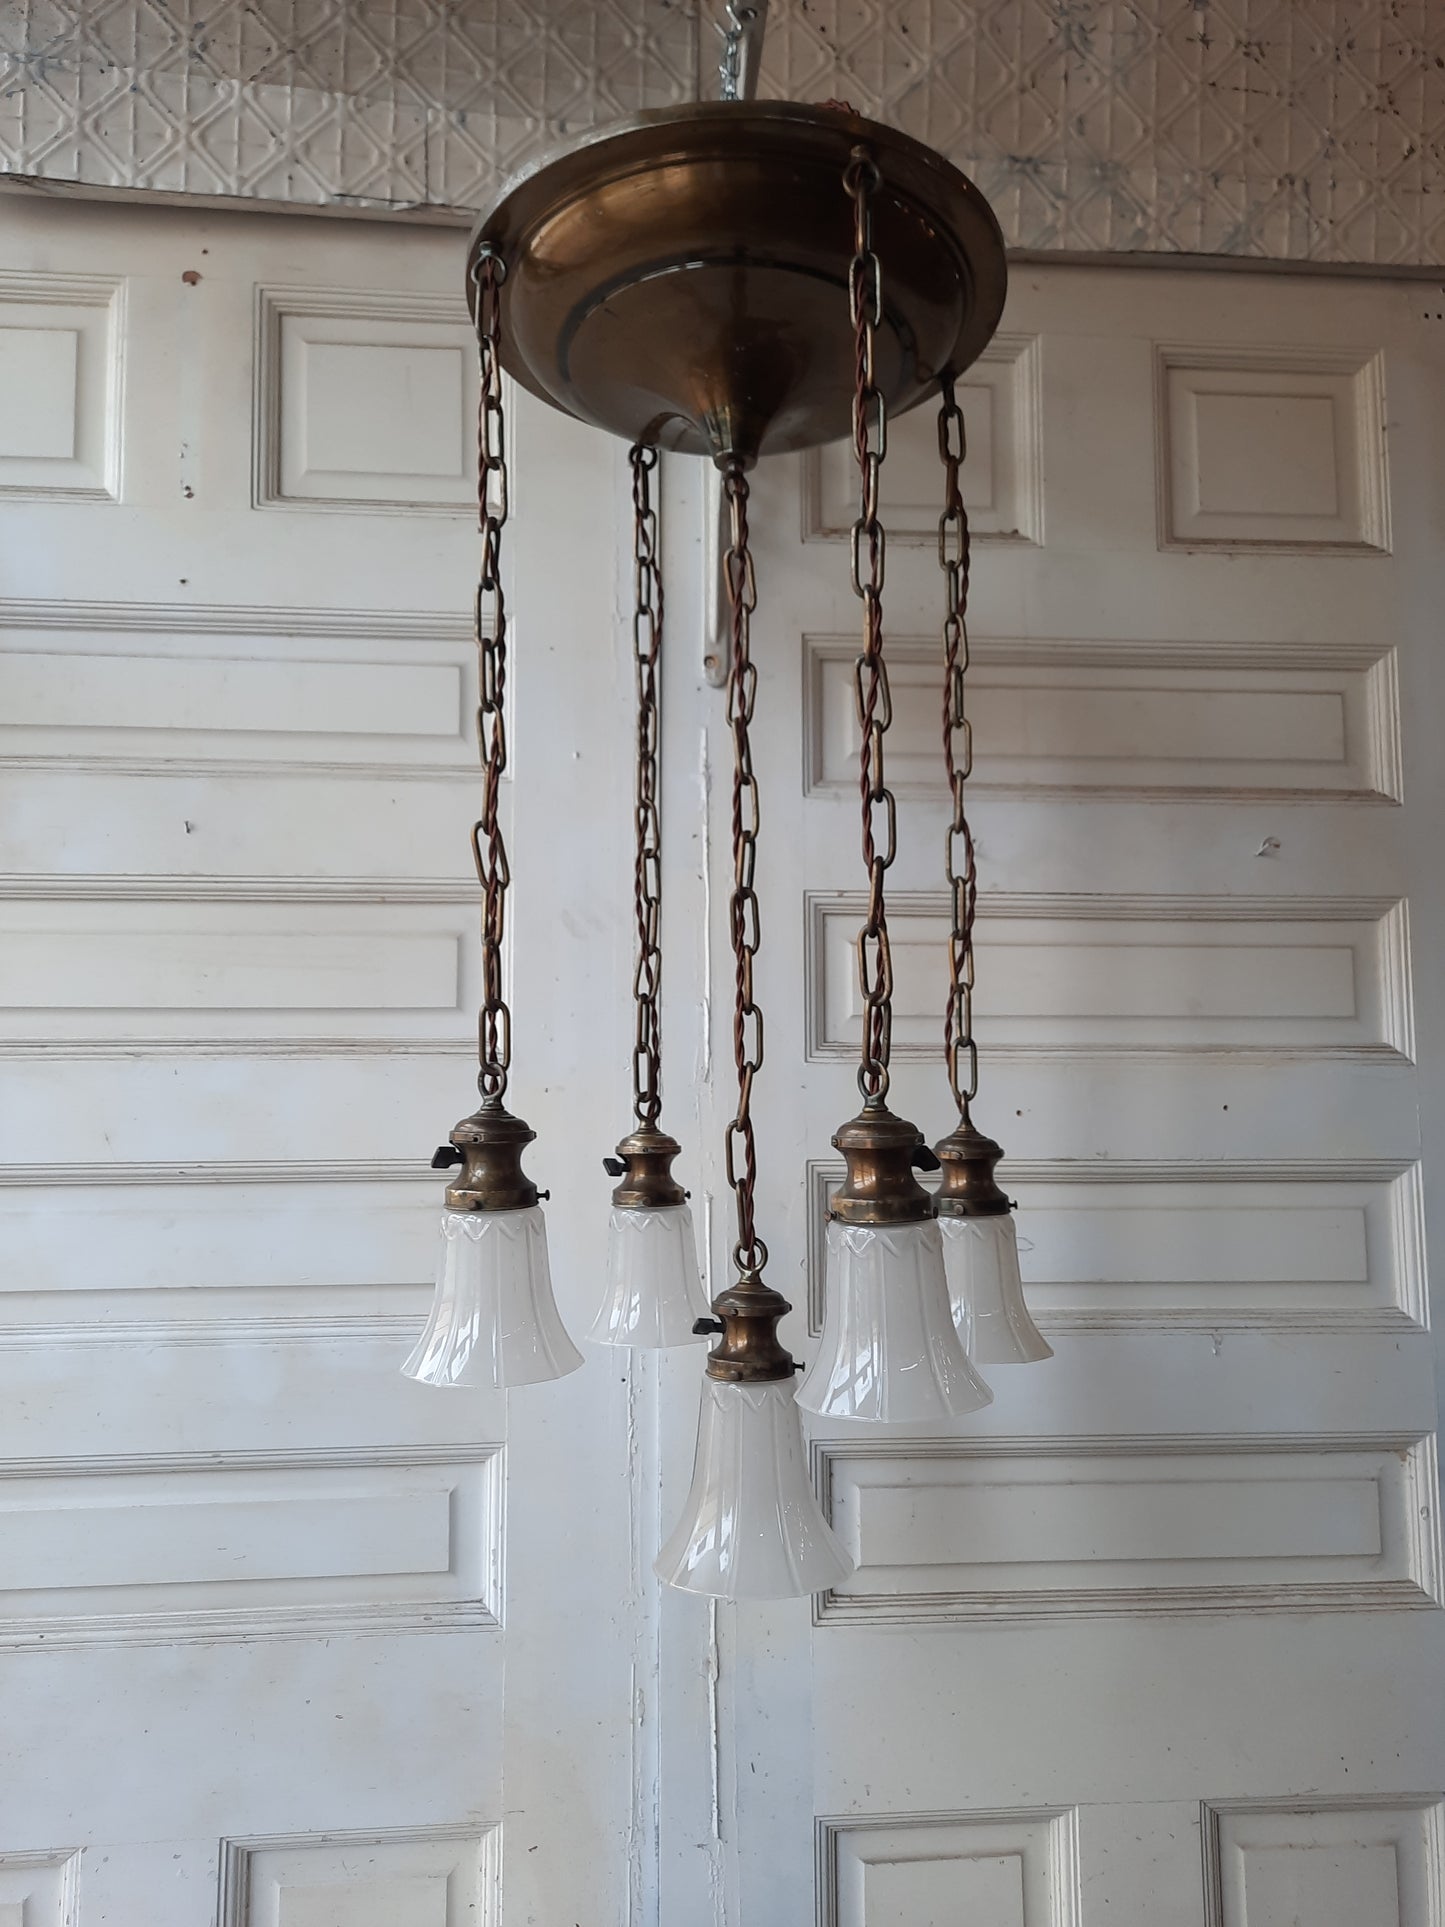 Antique Brass Pan Light with Five Hanging Chain Lights, Large Flush Mount Ceiling Light with Hanging Sockets